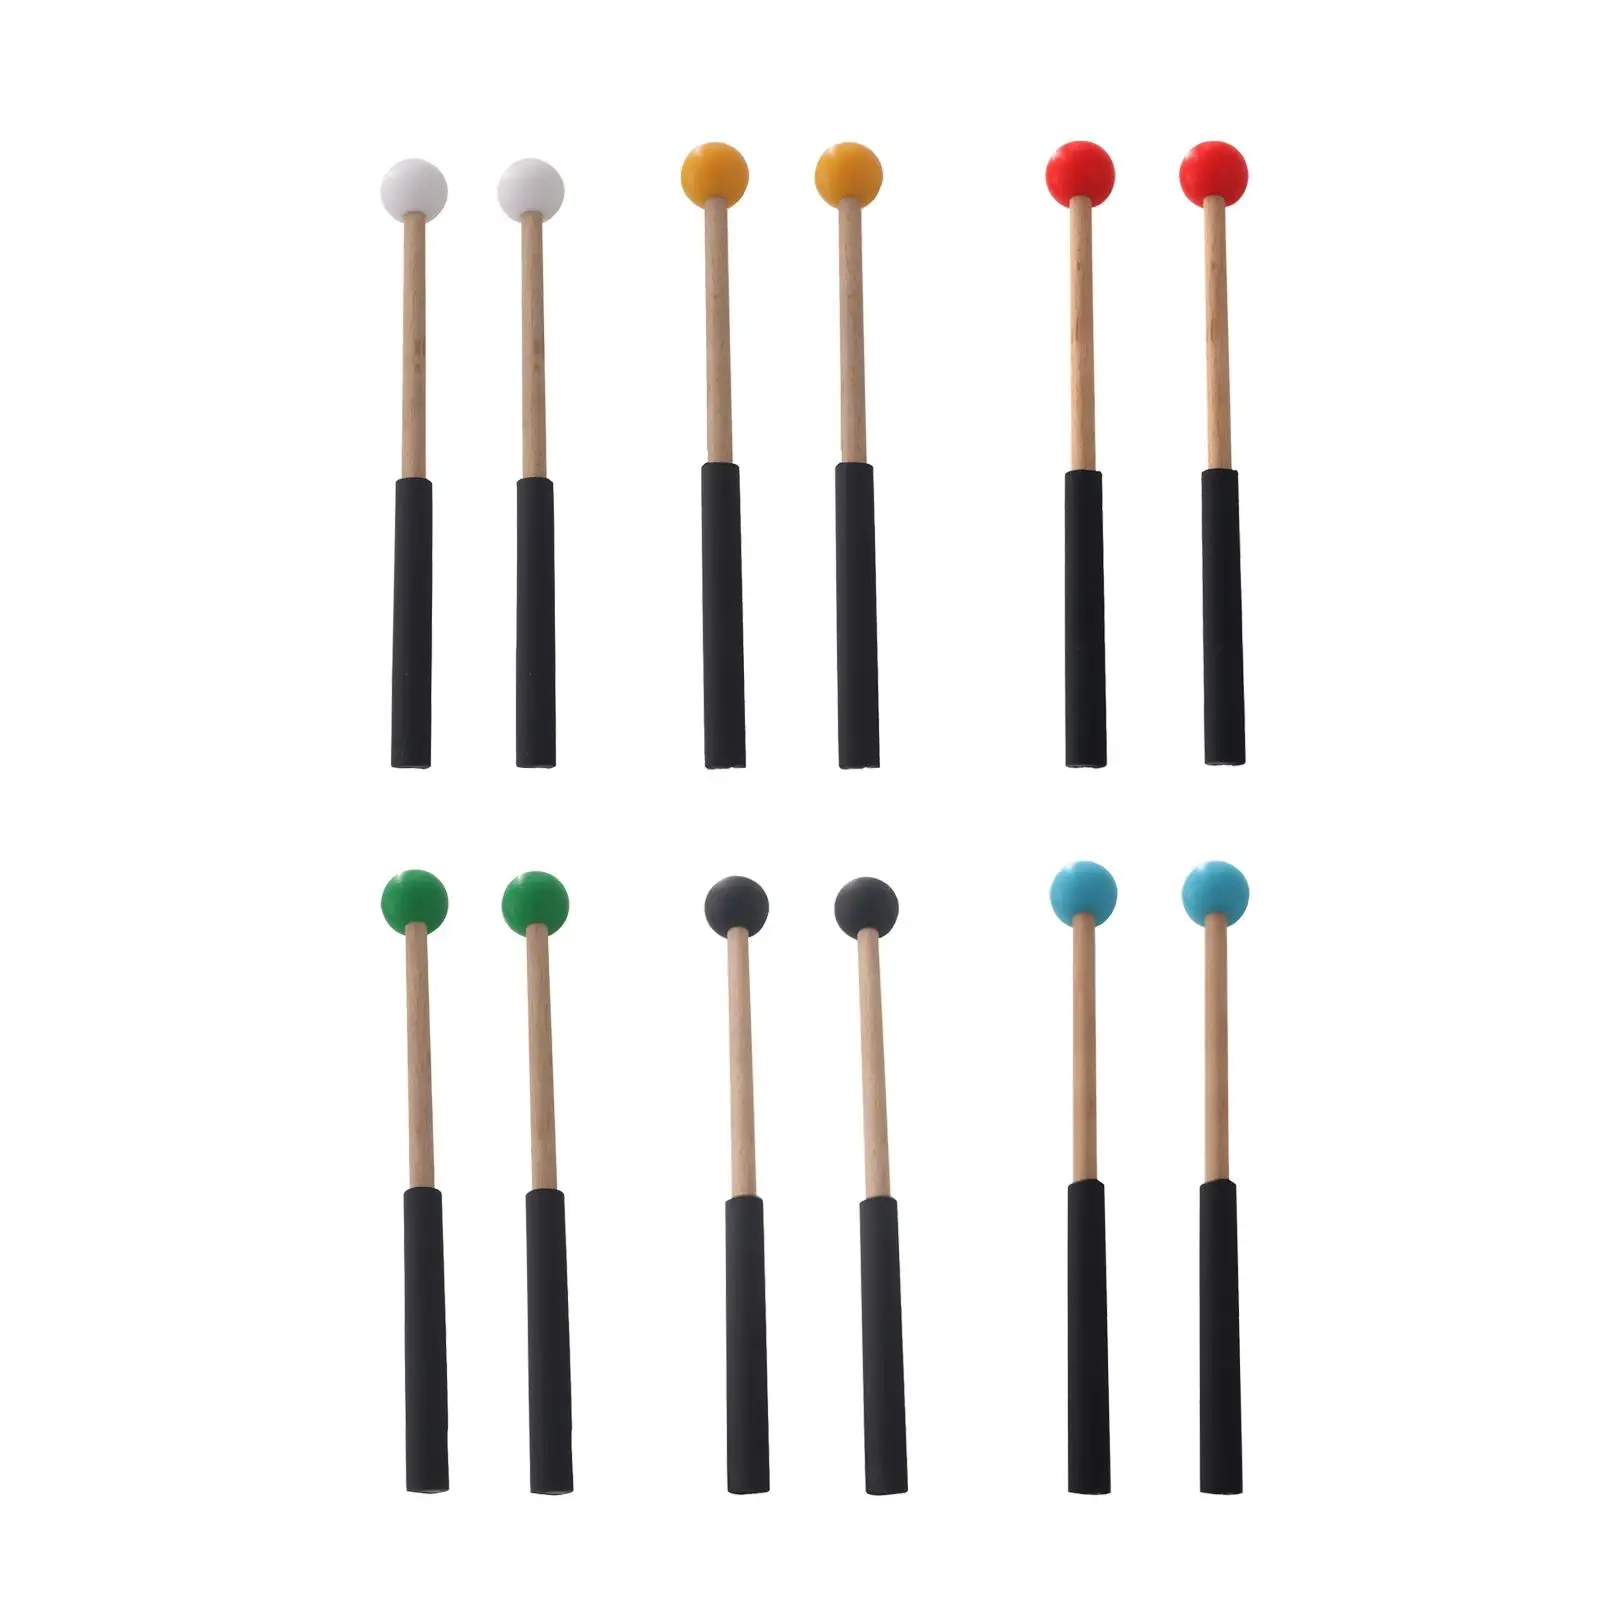 2Pcs 8.6inch Rubber Mallet Percussion Musical Drumstick with Wood Handle Lightweight Drum Mallet for Carillon Xylophone Yoga